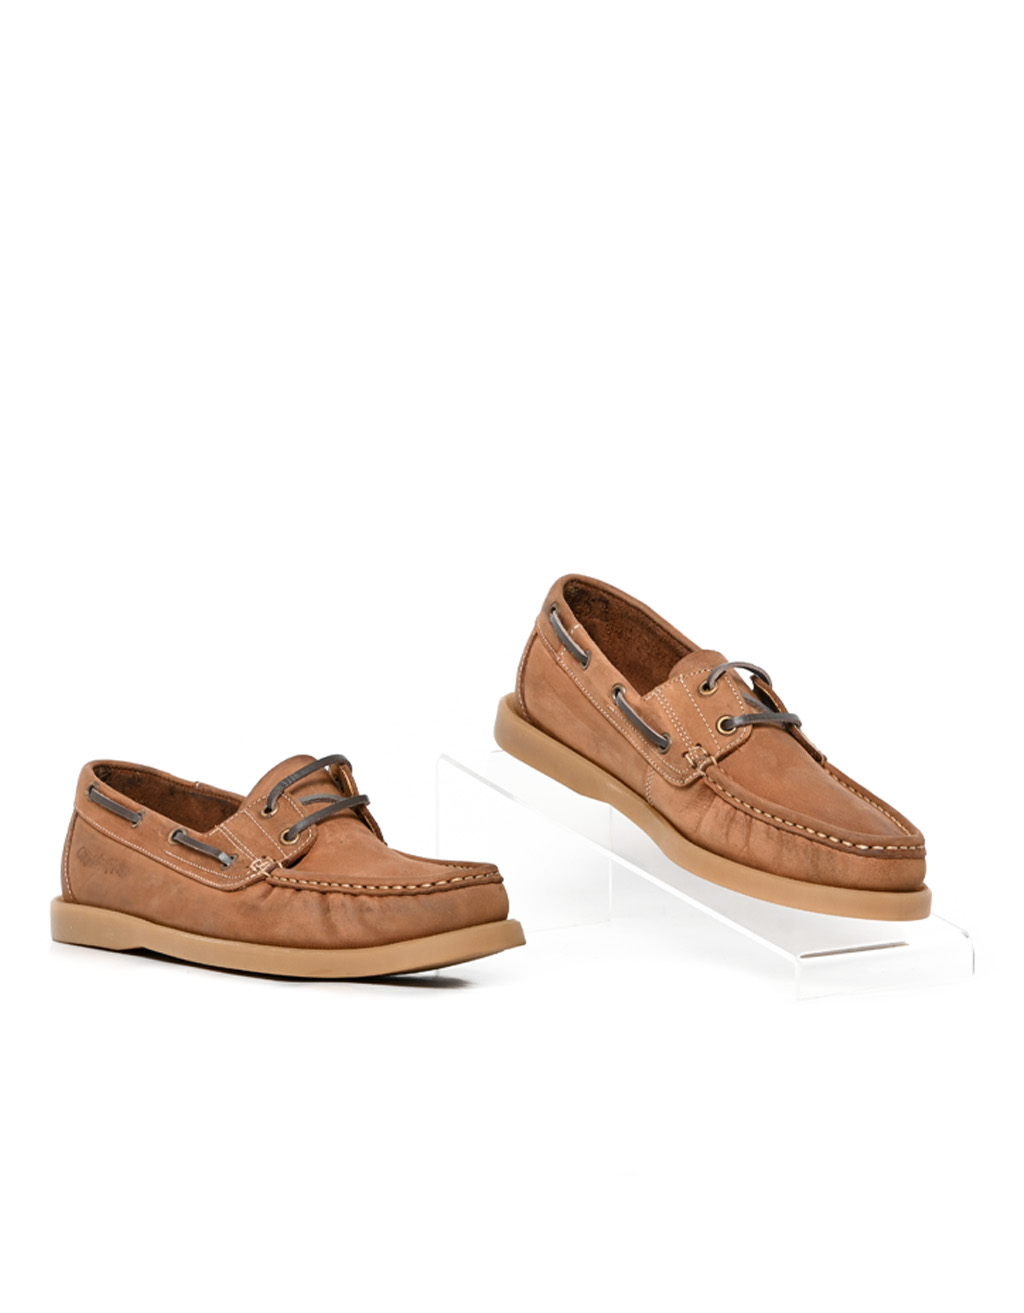 Mens Grasshoppers, Josh, Casual Dark Brown Moccasins – Bolton Shoes